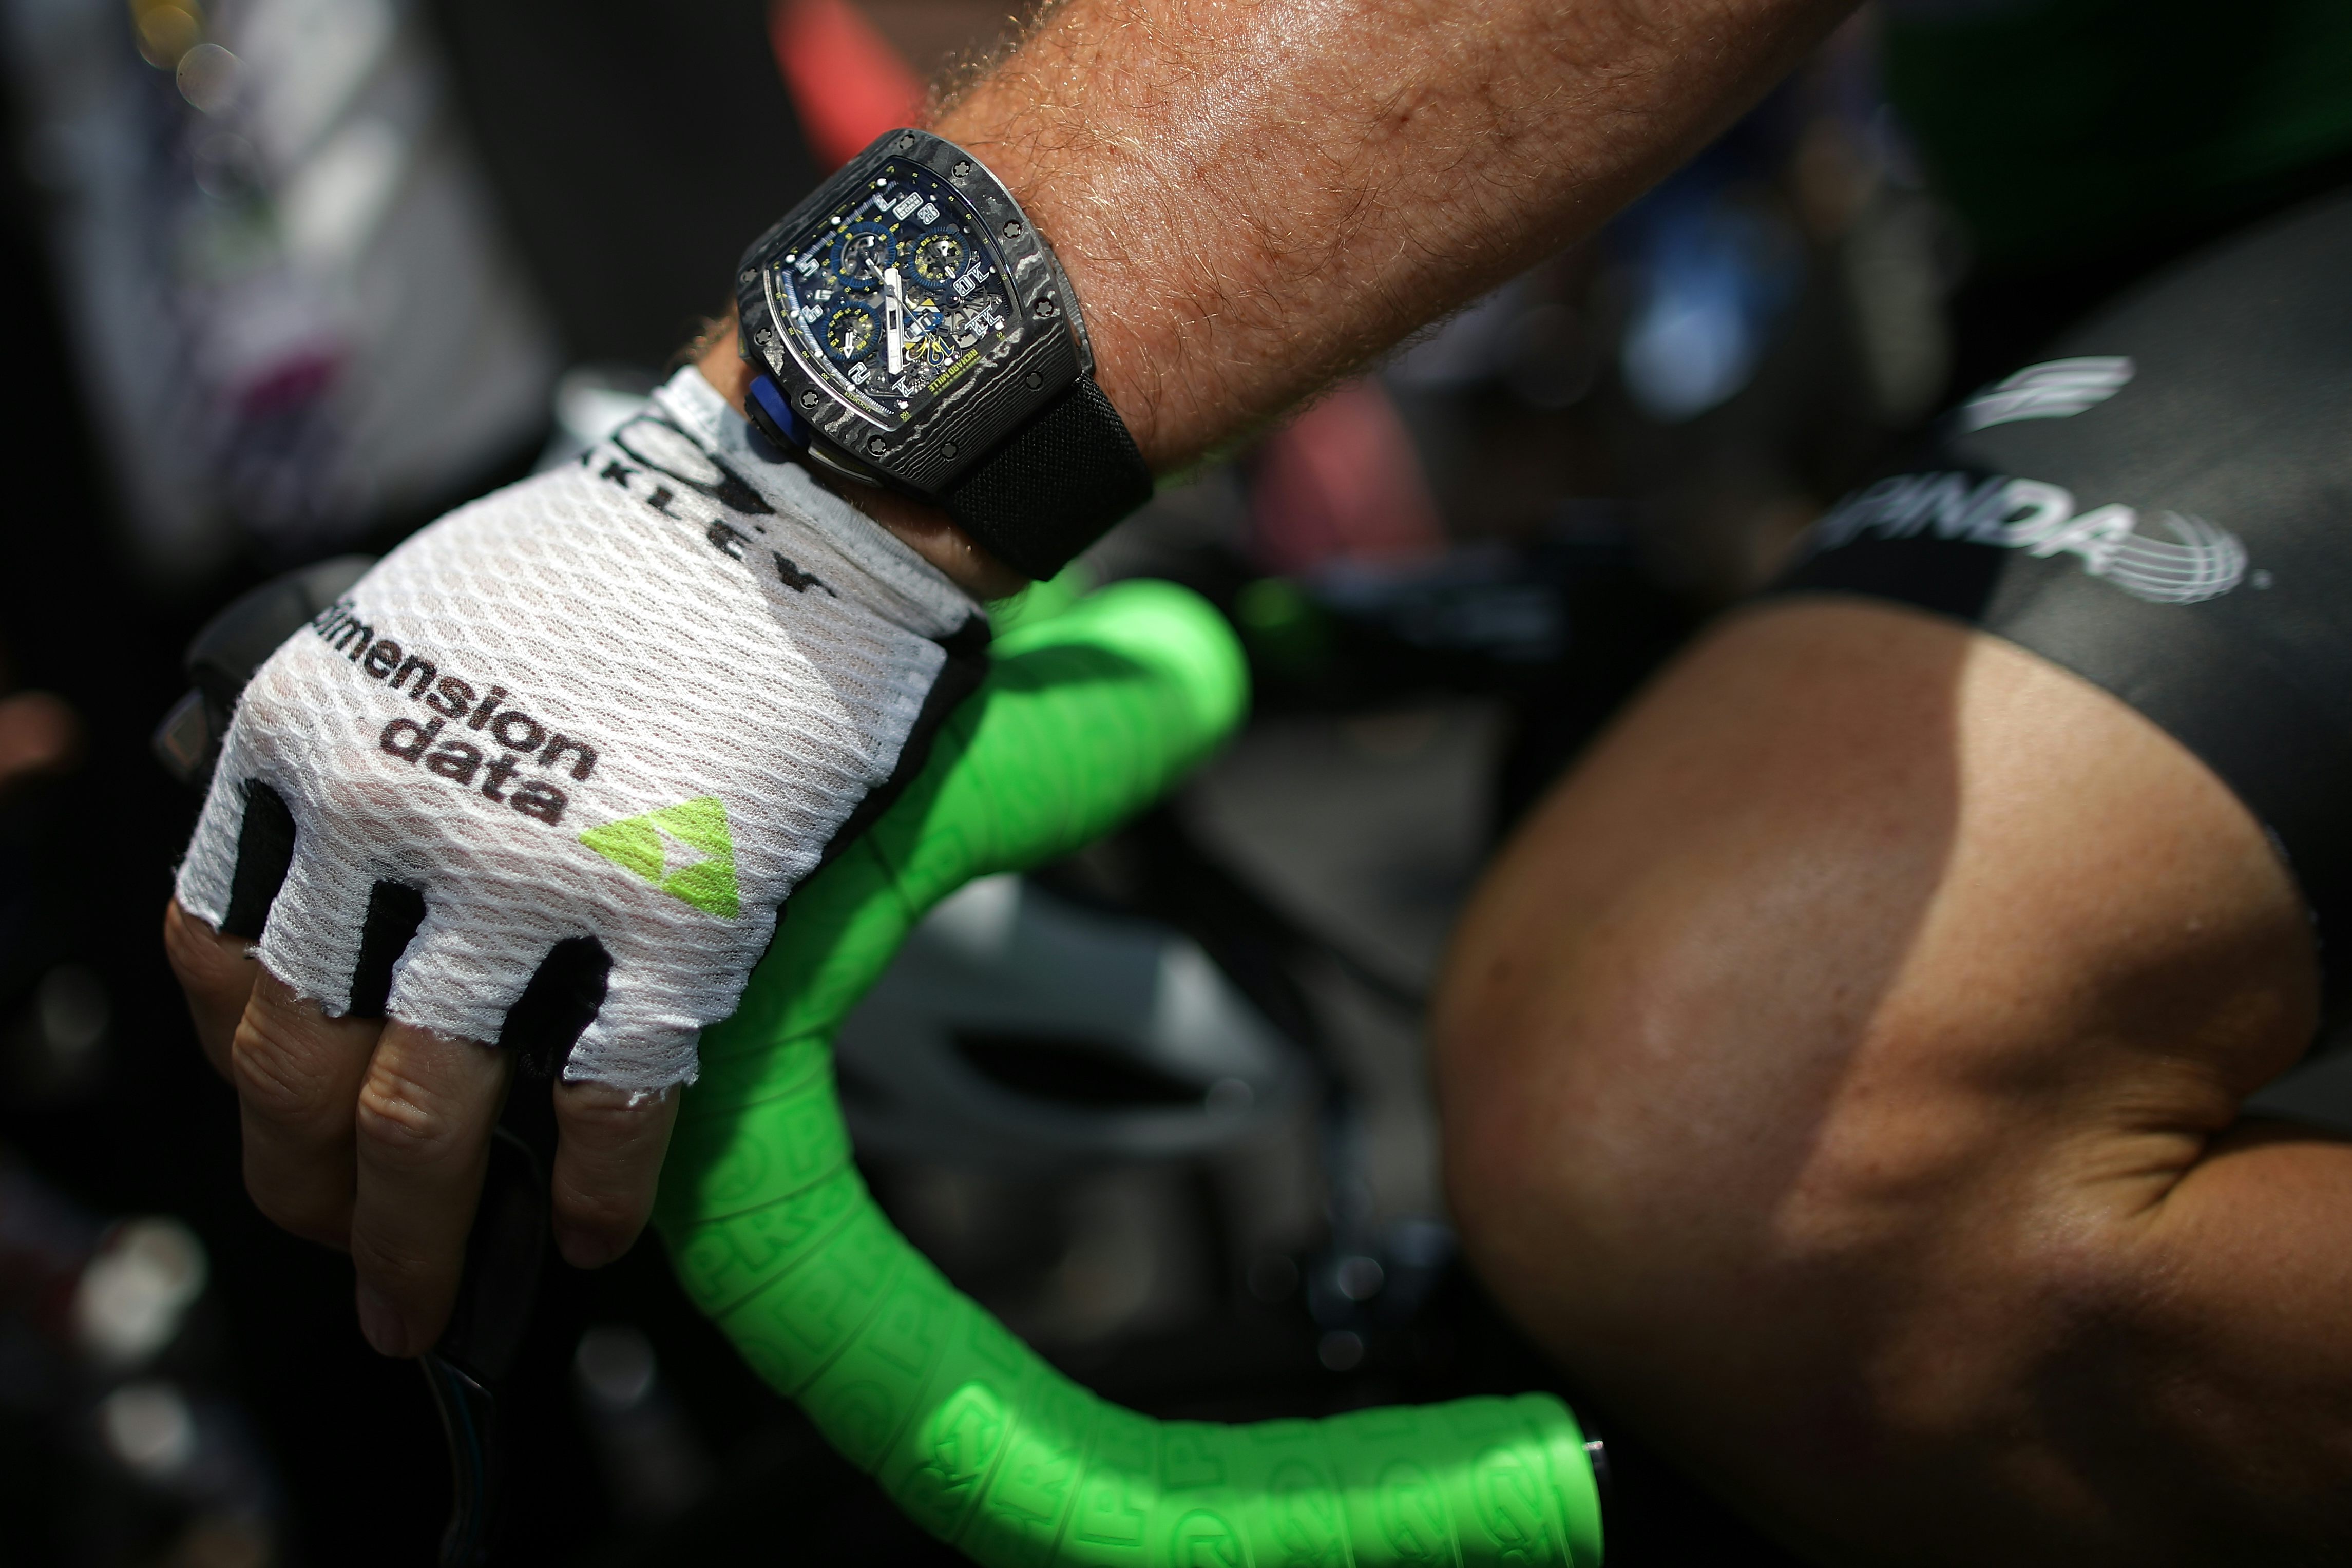 The Sports Section: What's The Best Watch For Cyclists? - Hodinkee